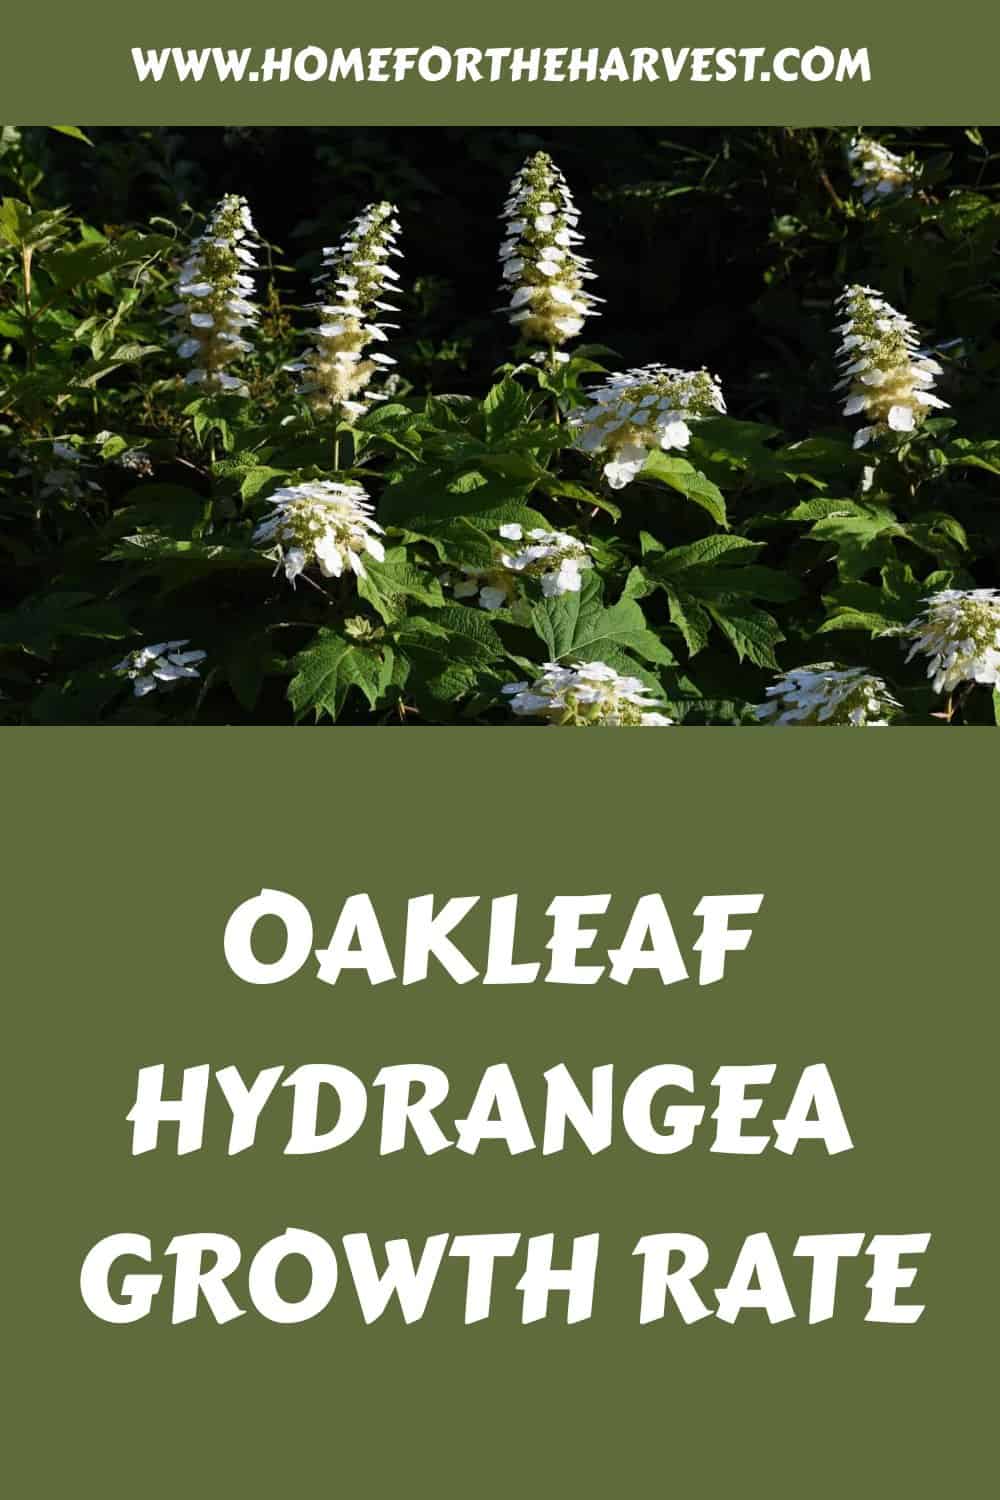 Oakleaf hydrangea growth rate generated pin 47087